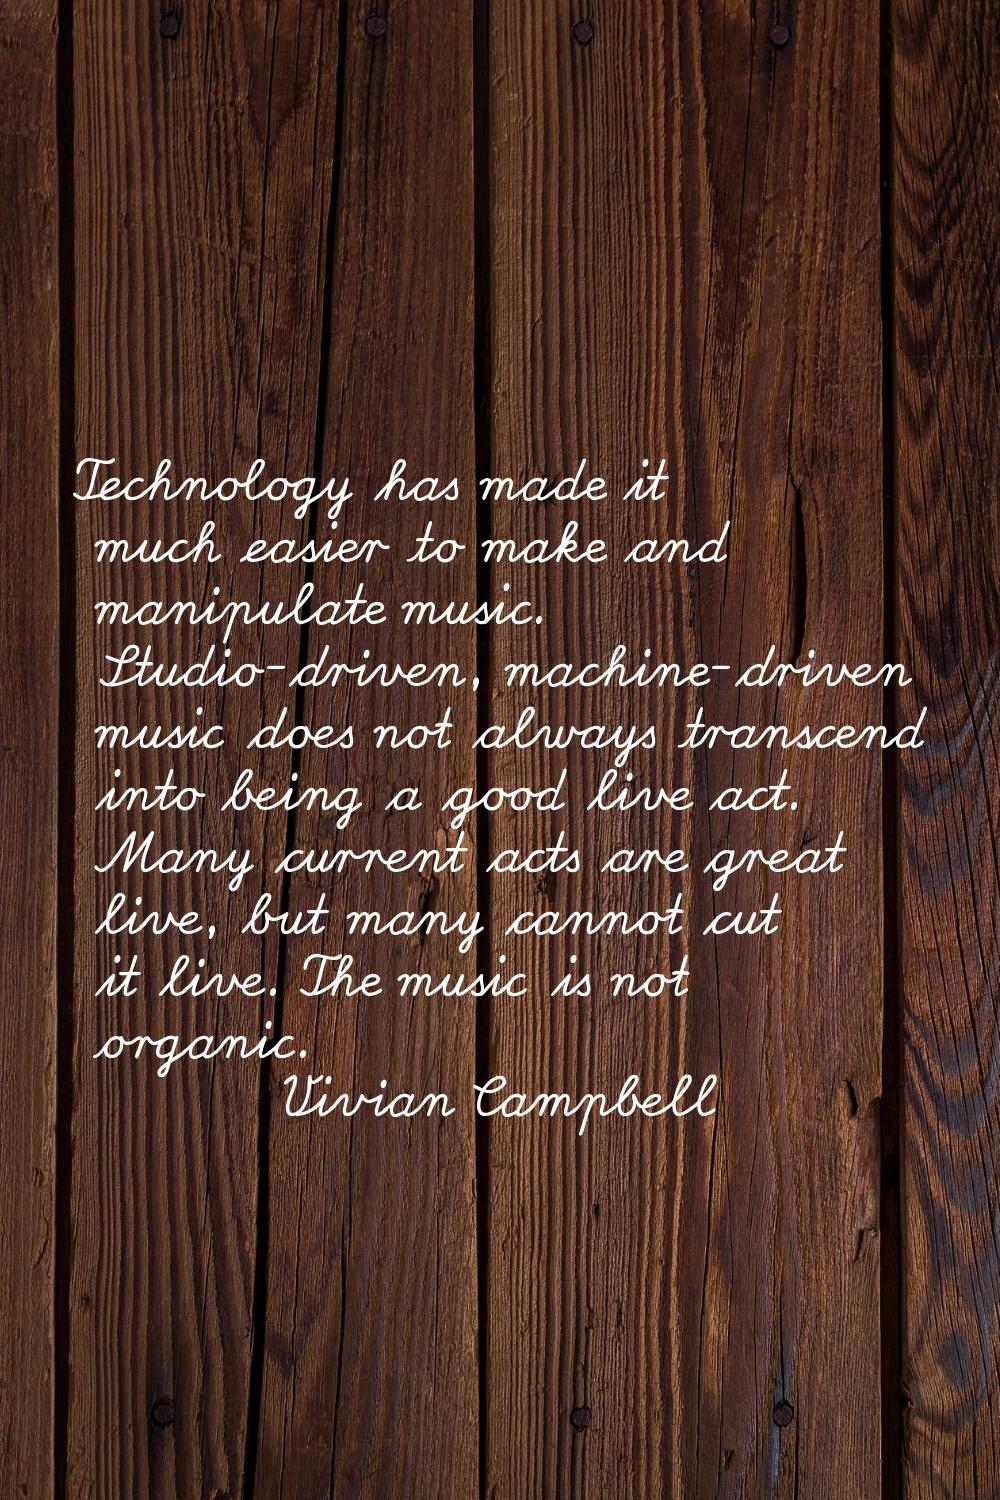 Technology has made it much easier to make and manipulate music. Studio-driven, machine-driven musi